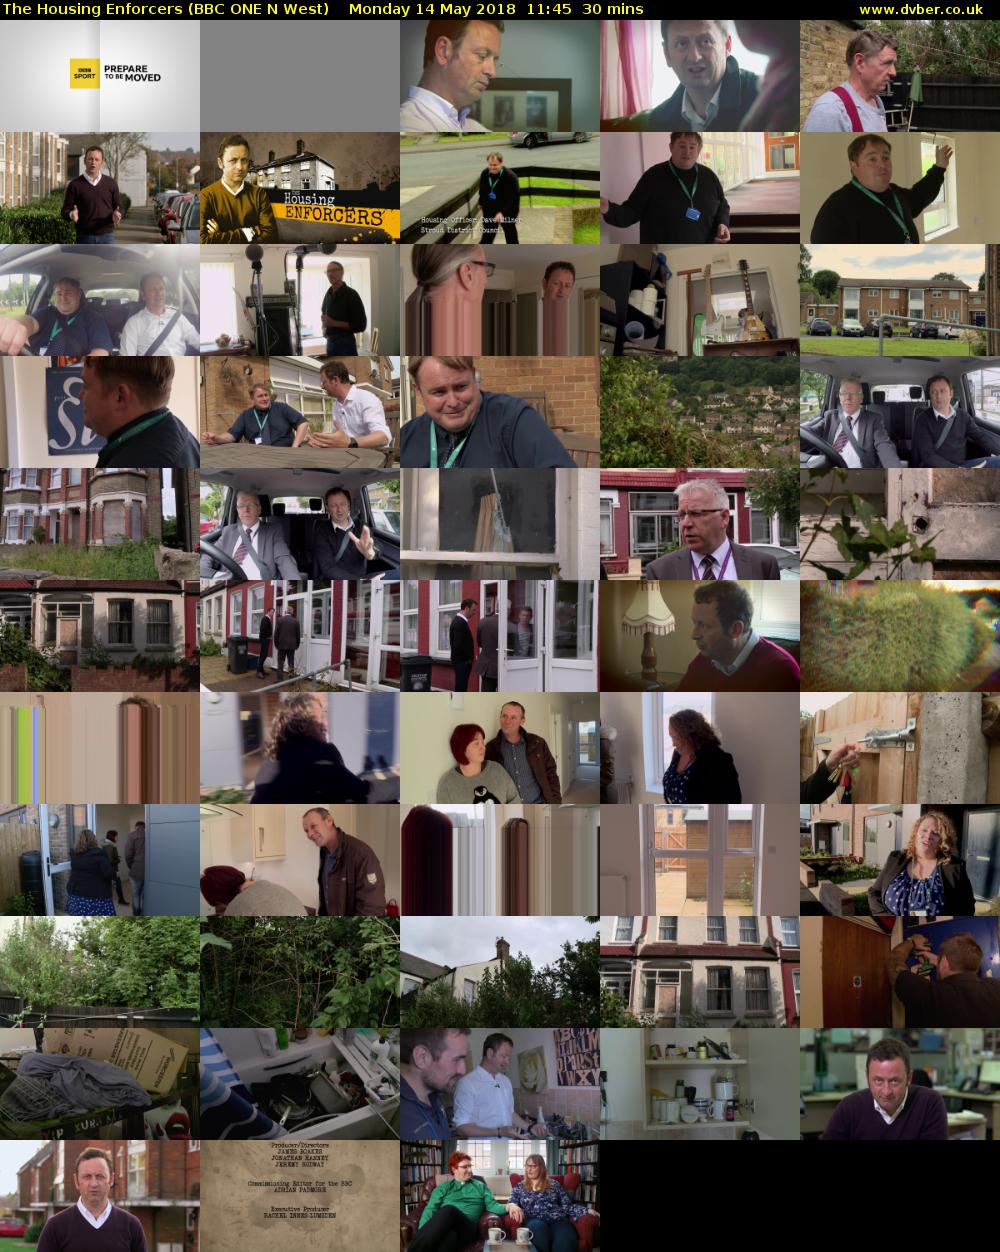 The Housing Enforcers (BBC ONE N West) Monday 14 May 2018 11:45 - 12:15